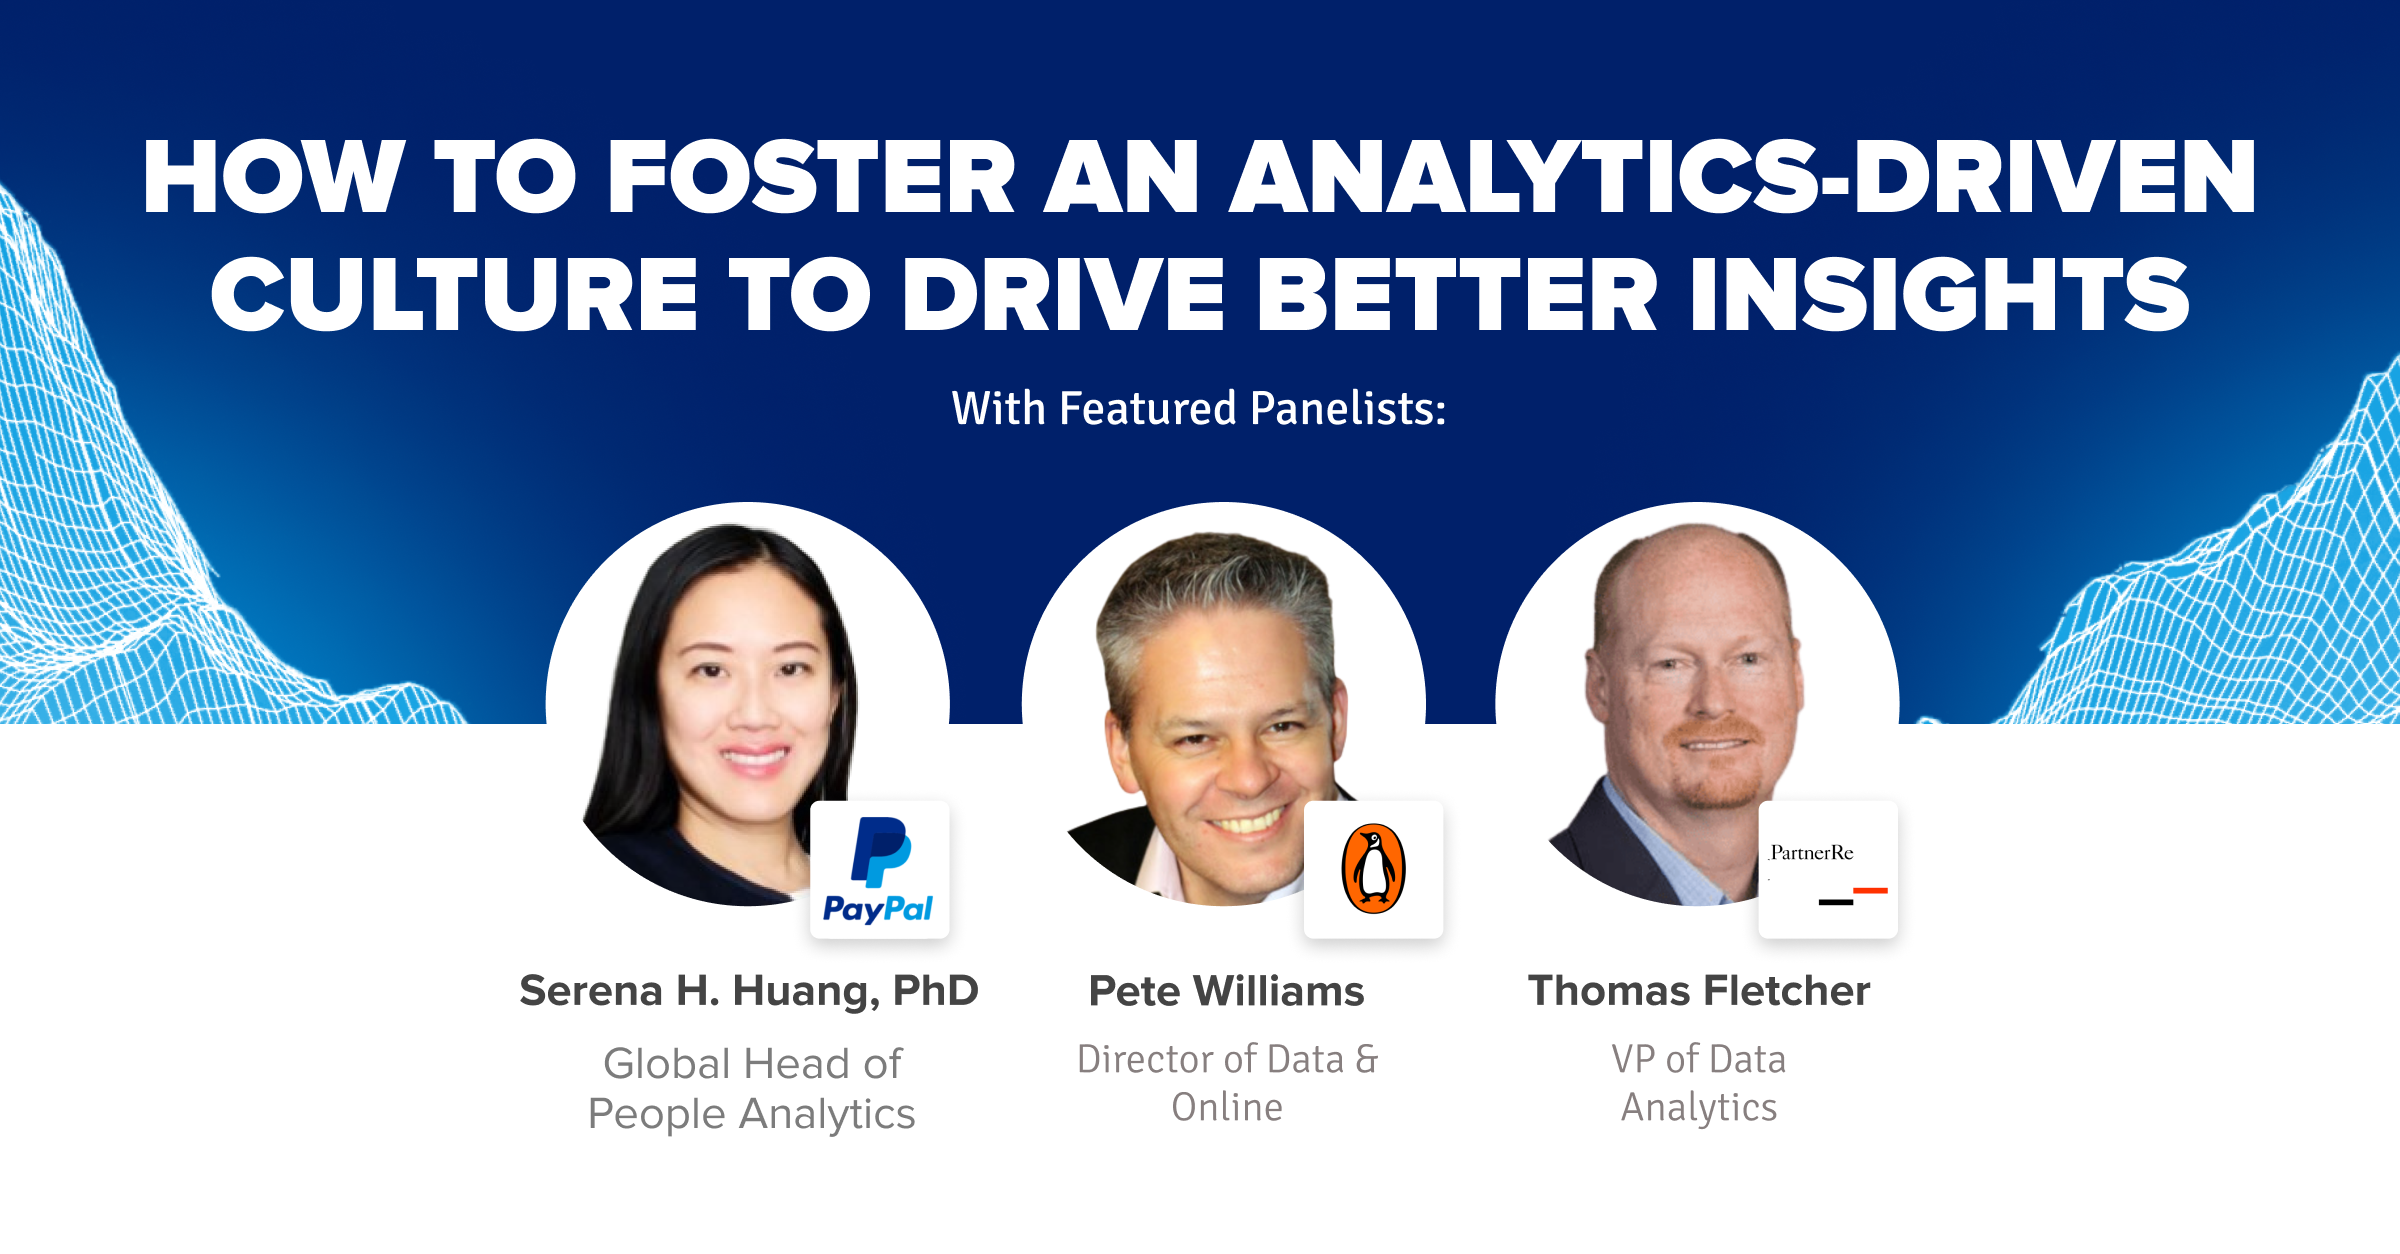 How to Foster an Analytics-Driven Culture to Drive Better Insights